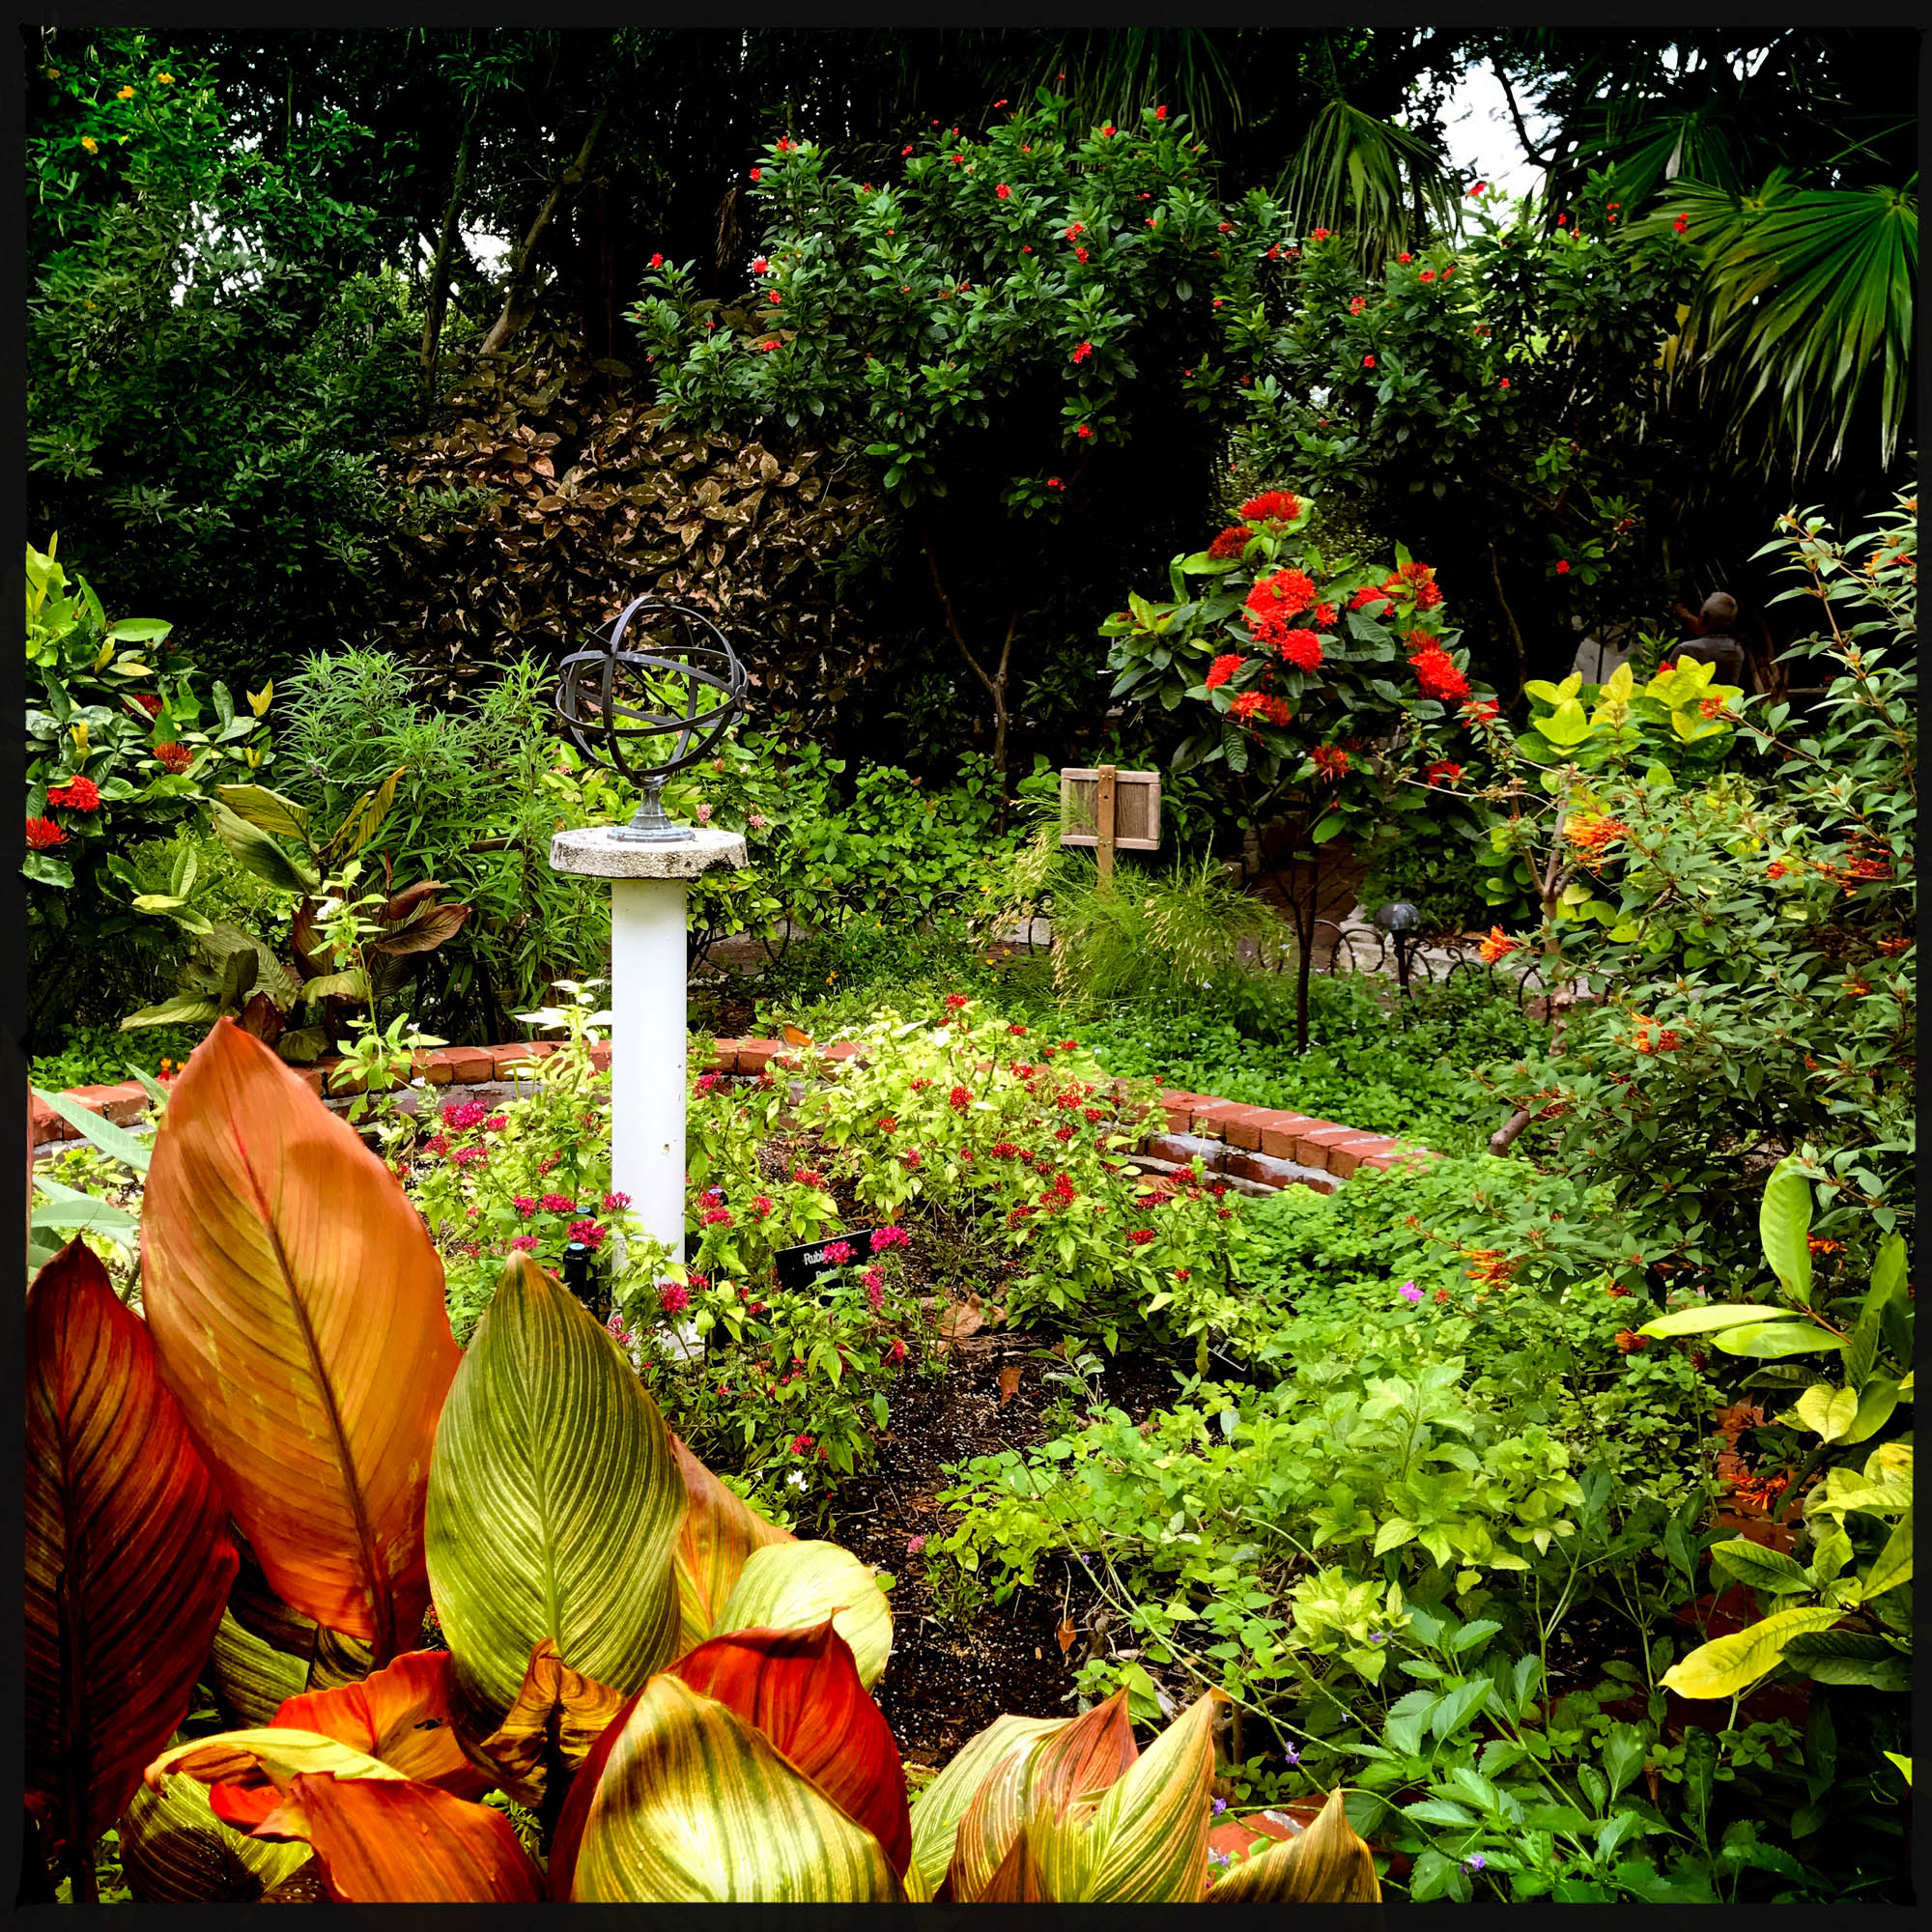 Exclusive Tours To Showcase Key West S Private Gardens Feb 28 29